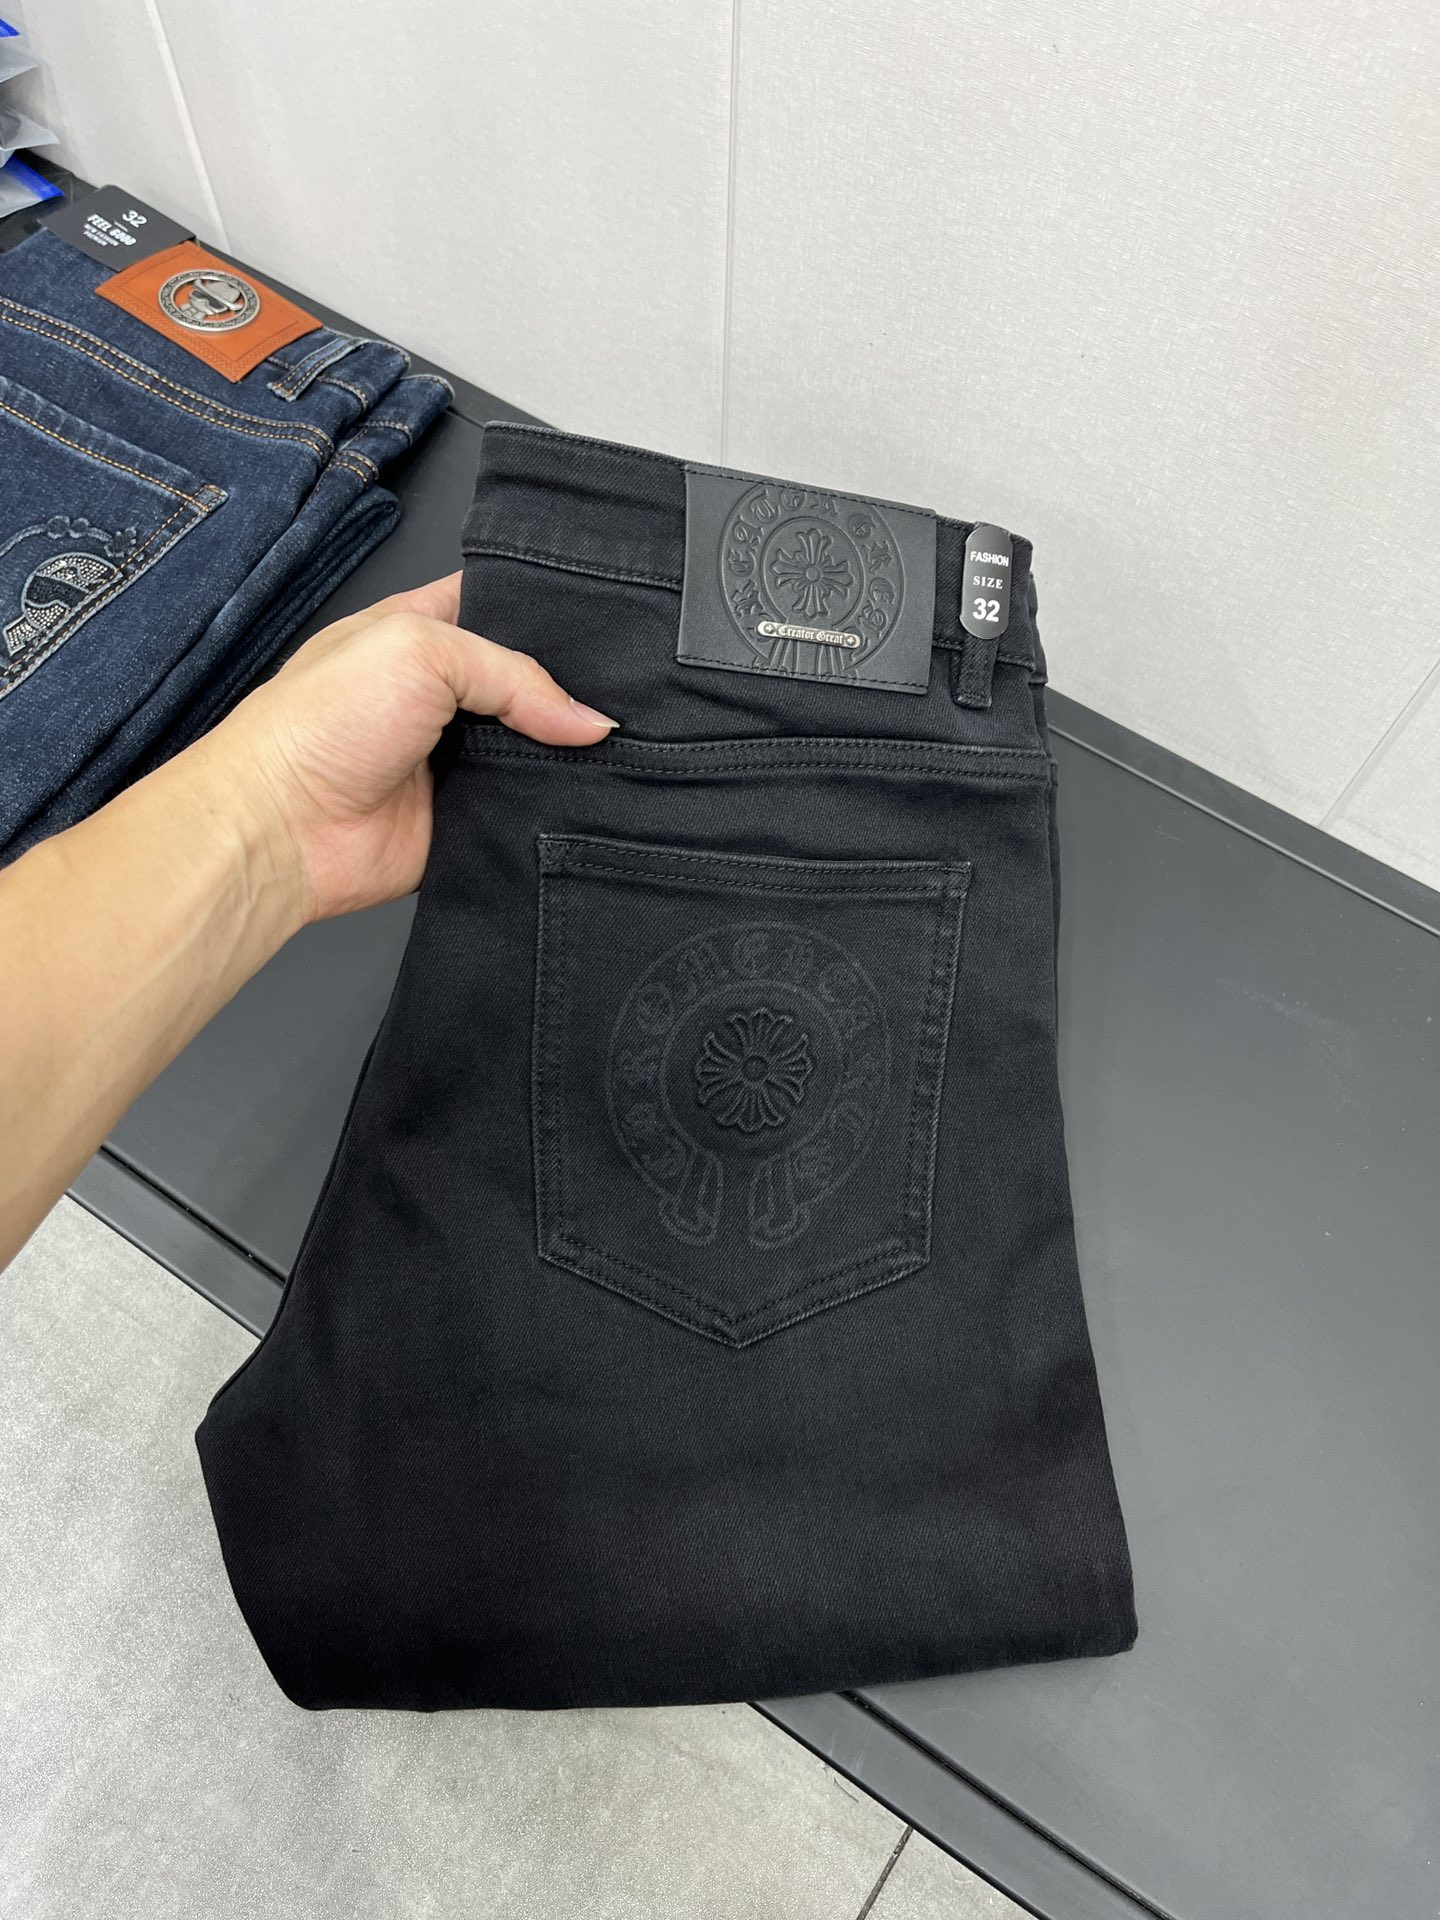 Chrome Hearts Clothing Jeans Top Perfect Fake
 Fall/Winter Collection Fashion